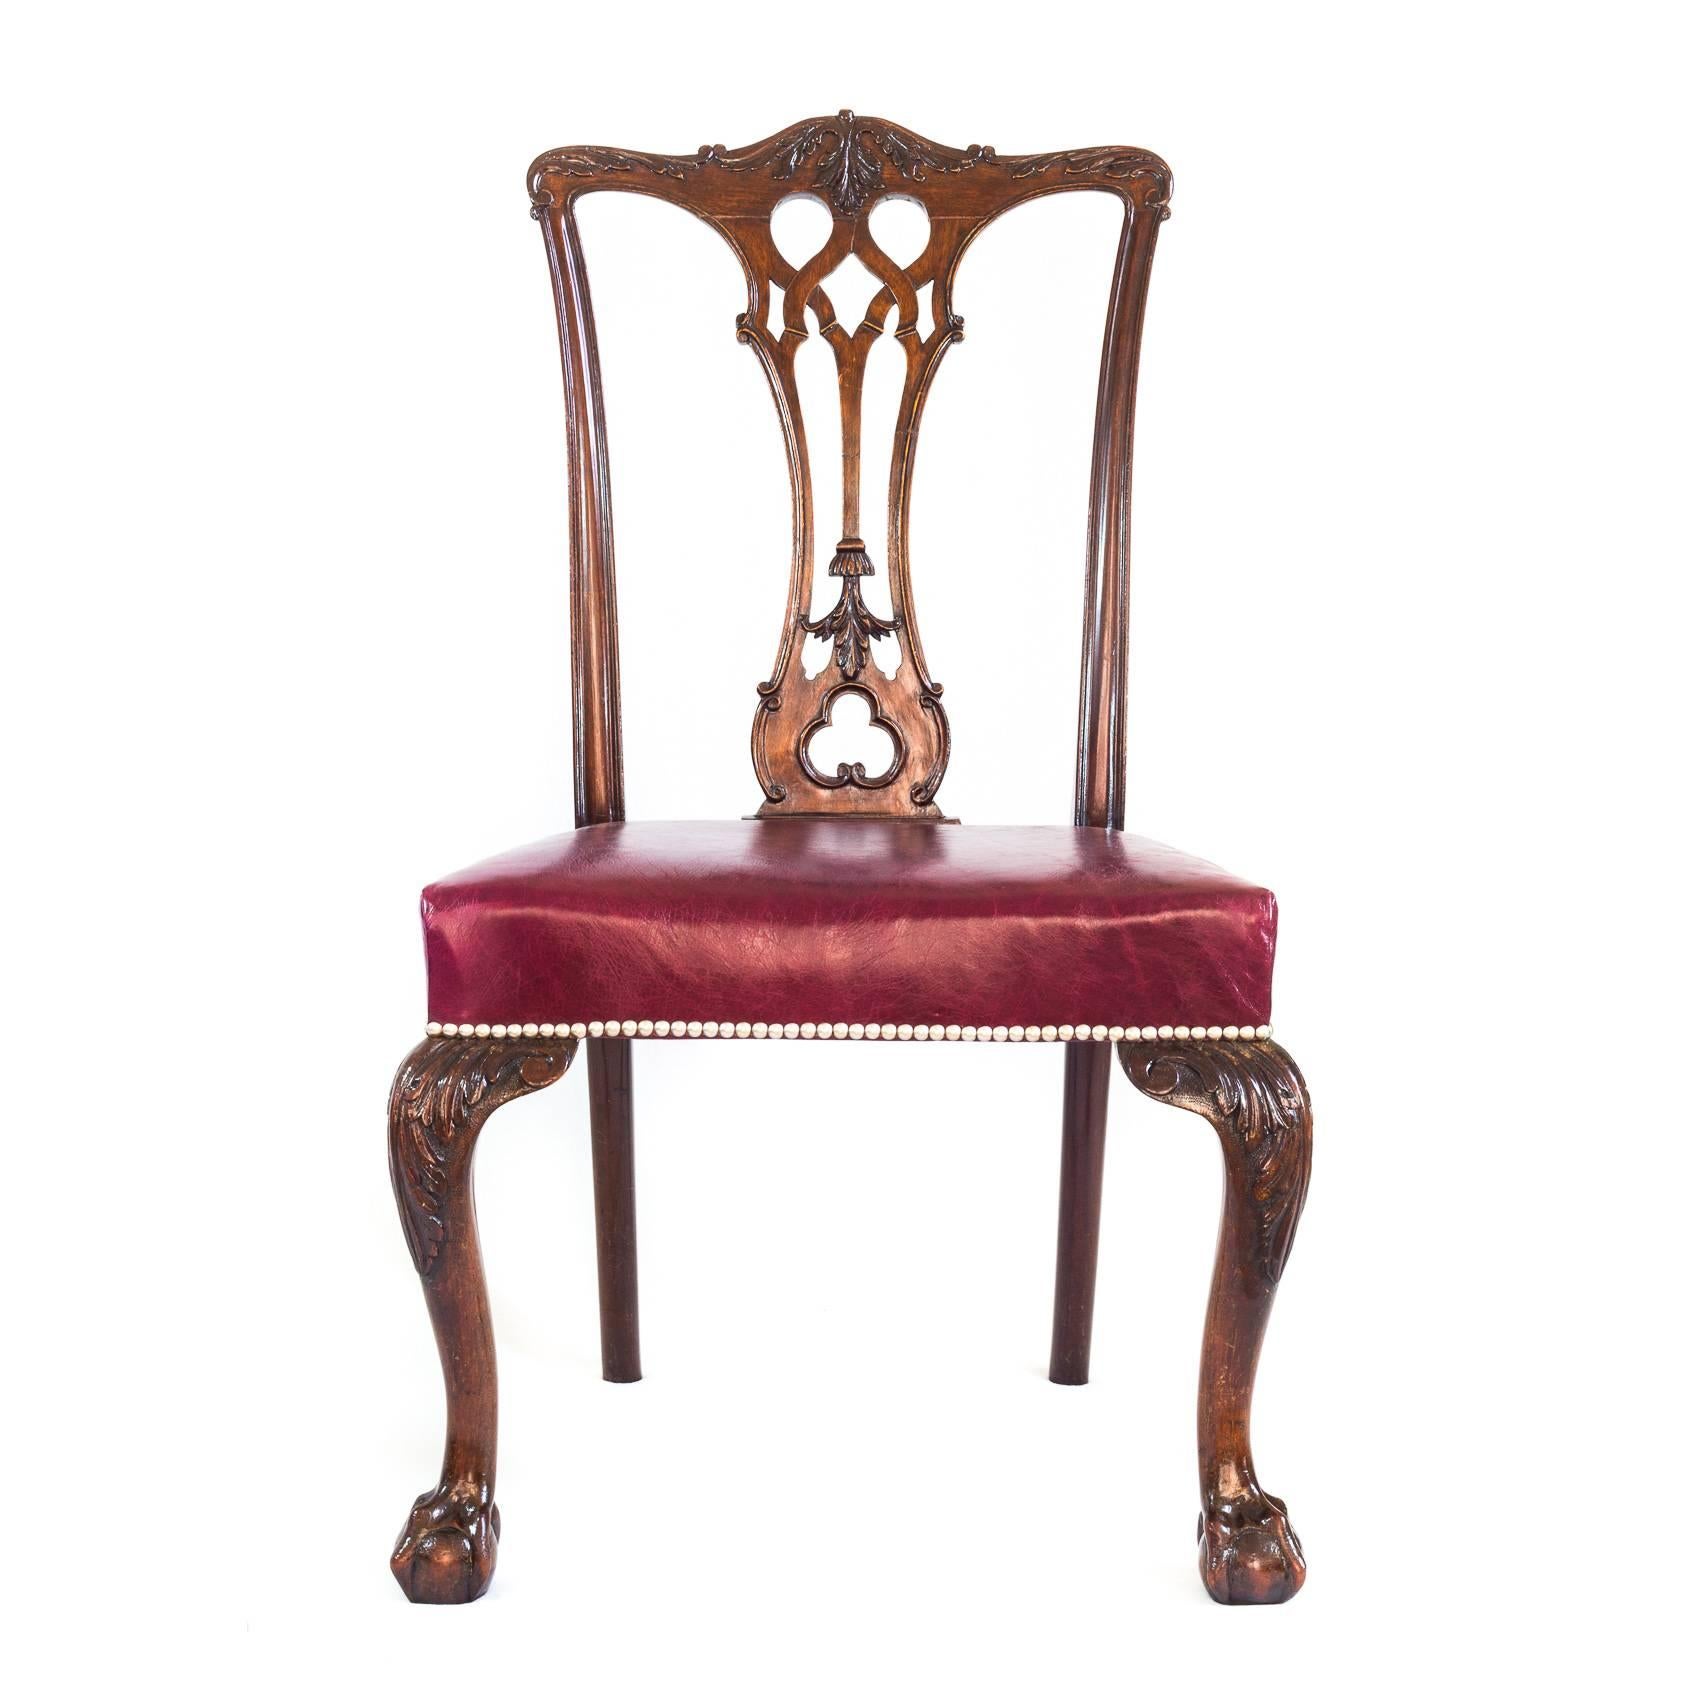 Gothic Revival Four 19th Century English Gothic Mahogany Chairs